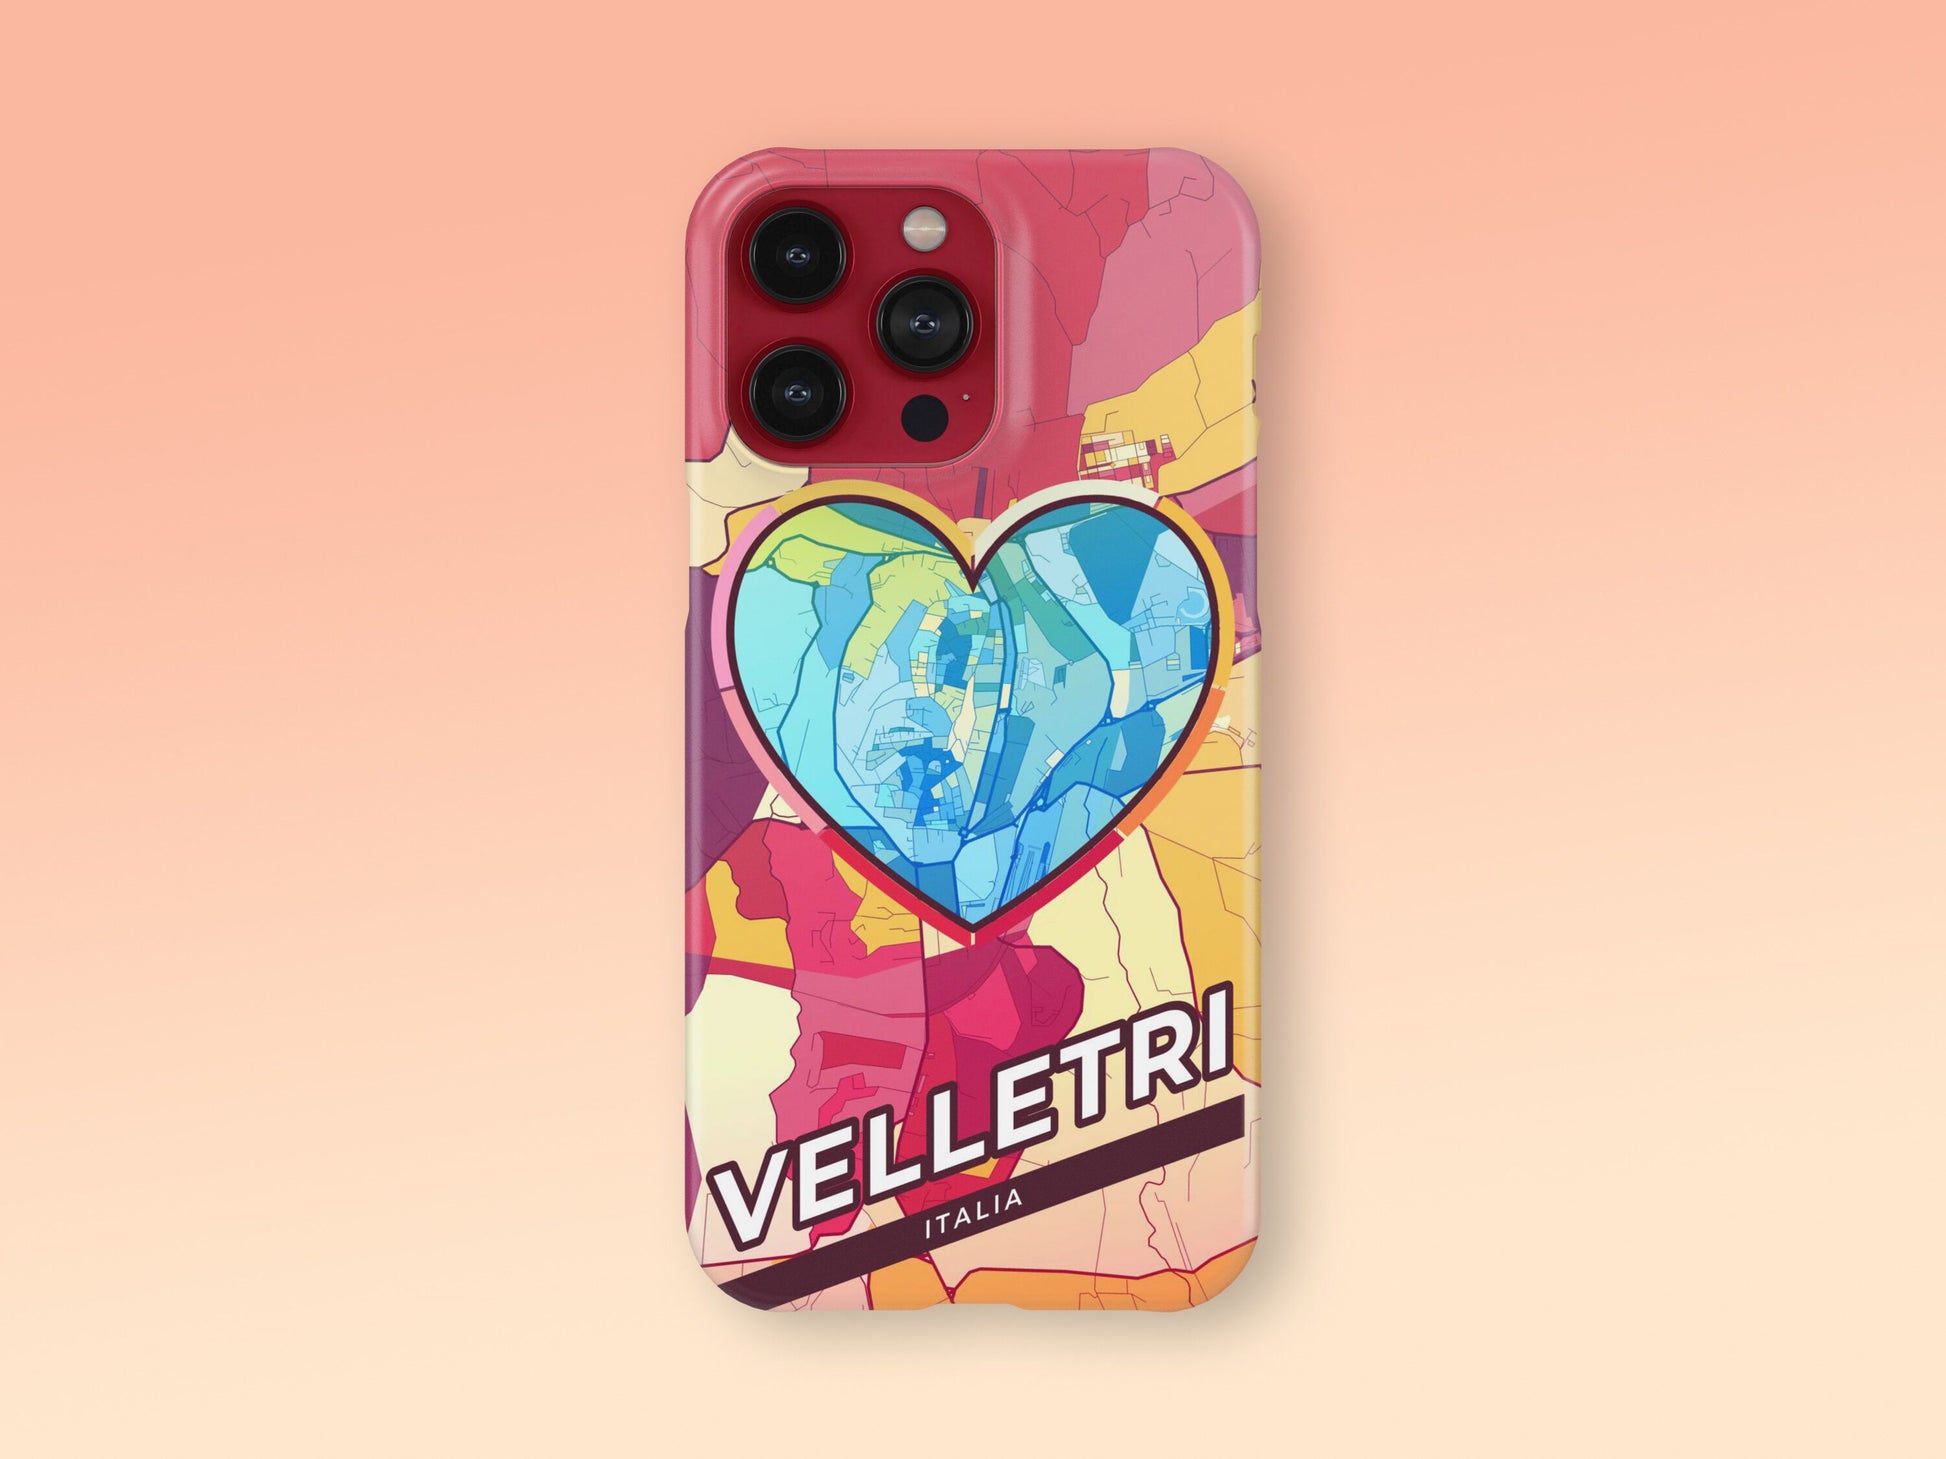 Velletri Italy slim phone case with colorful icon 2